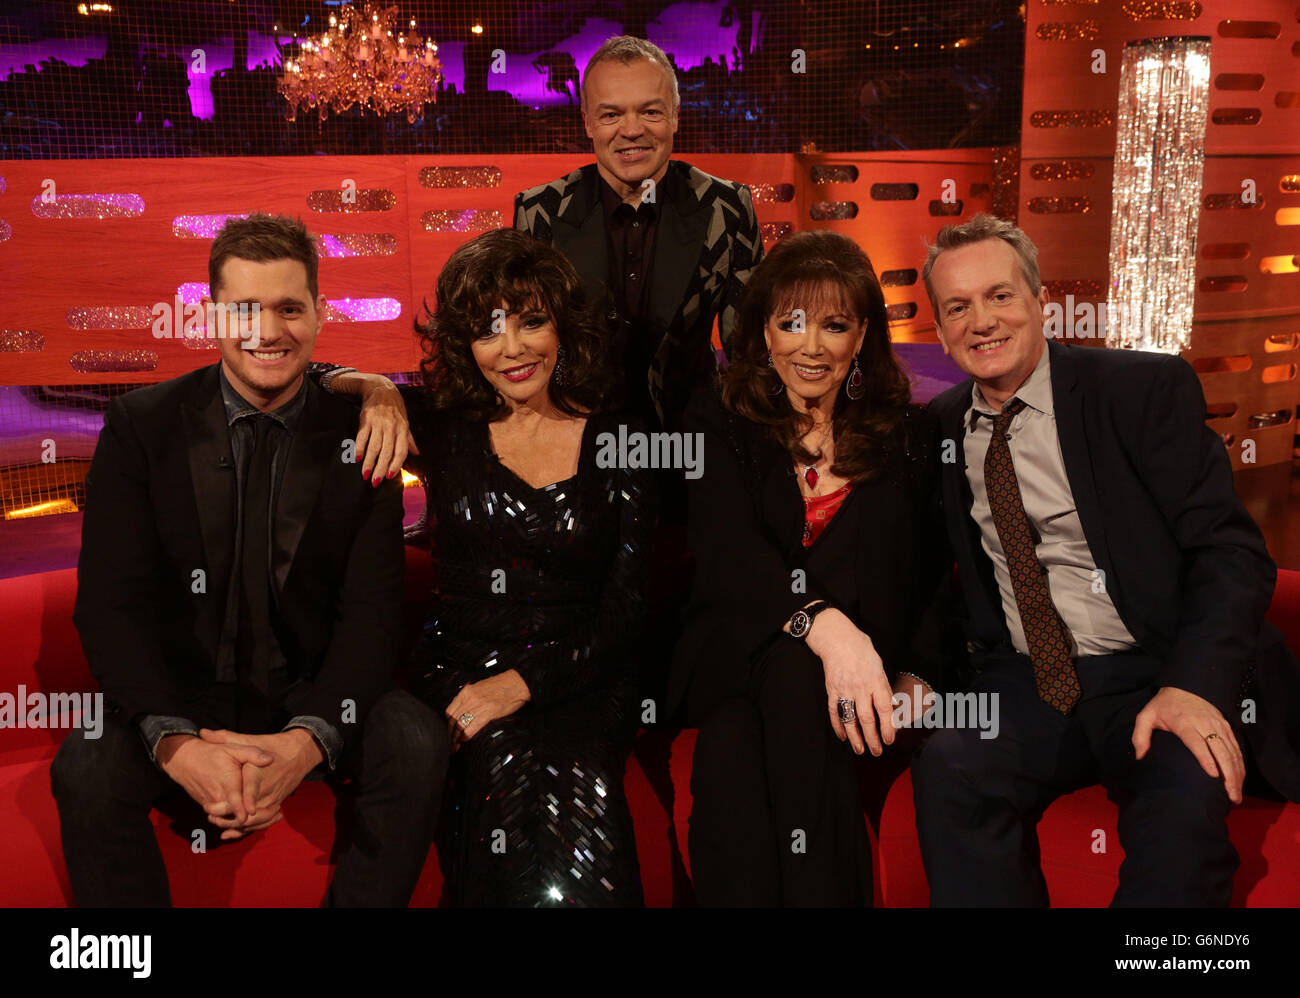 Michael Buble, Joan Collins, Graham Norton, Jackie Collins and Frank Skinner during the filming of the New Year's Eve Graham Norton Show, at The London Studios, south London, to be aired on BBC One on Tuesday evening. Stock Photo